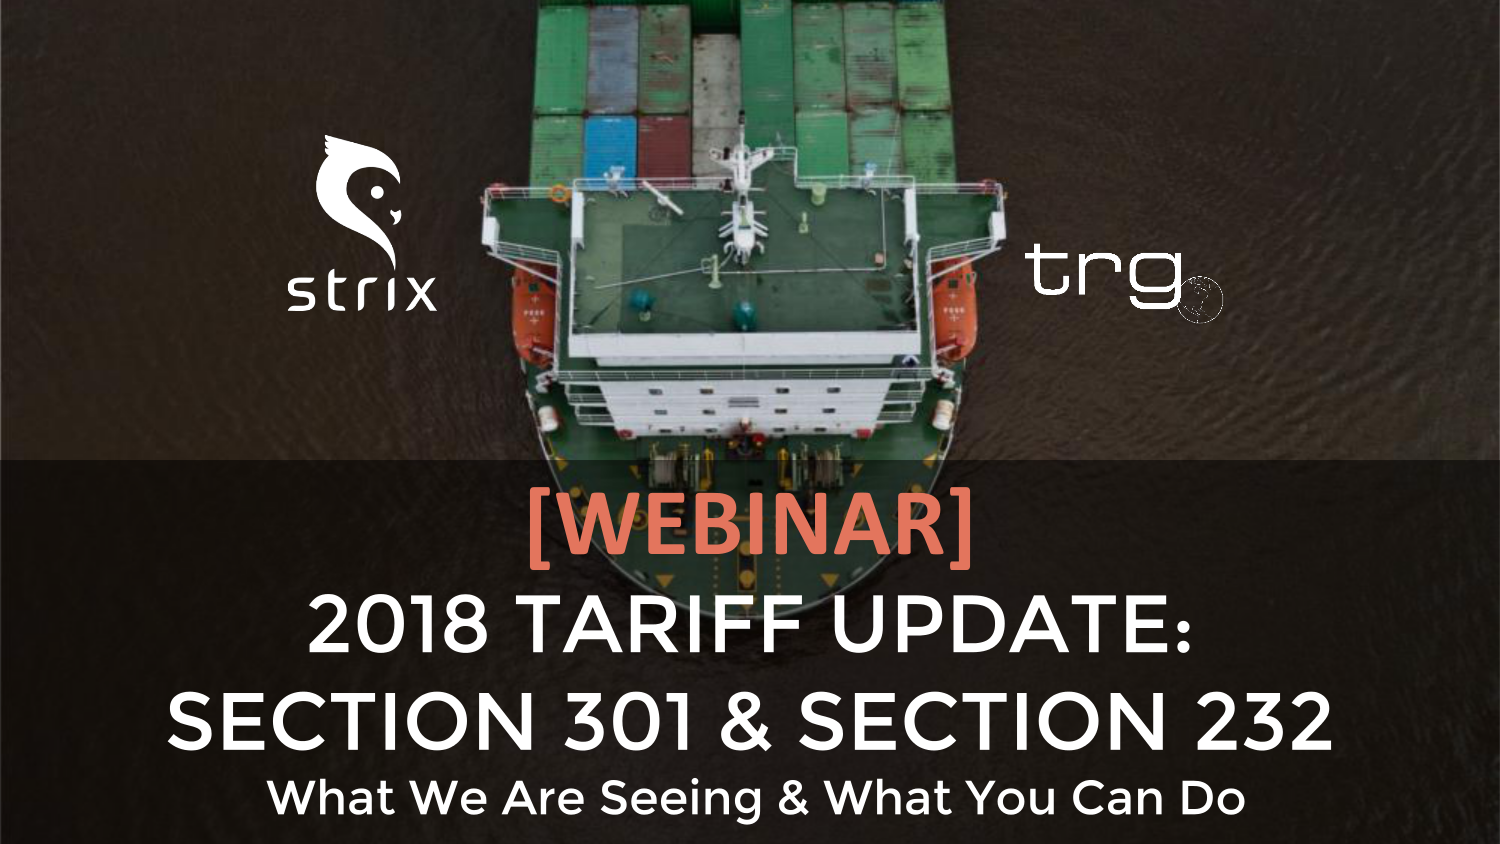 Trade Risk Guaranty hosts an educational webinar covering updates on the Section 232 and Section 301 tariffs.